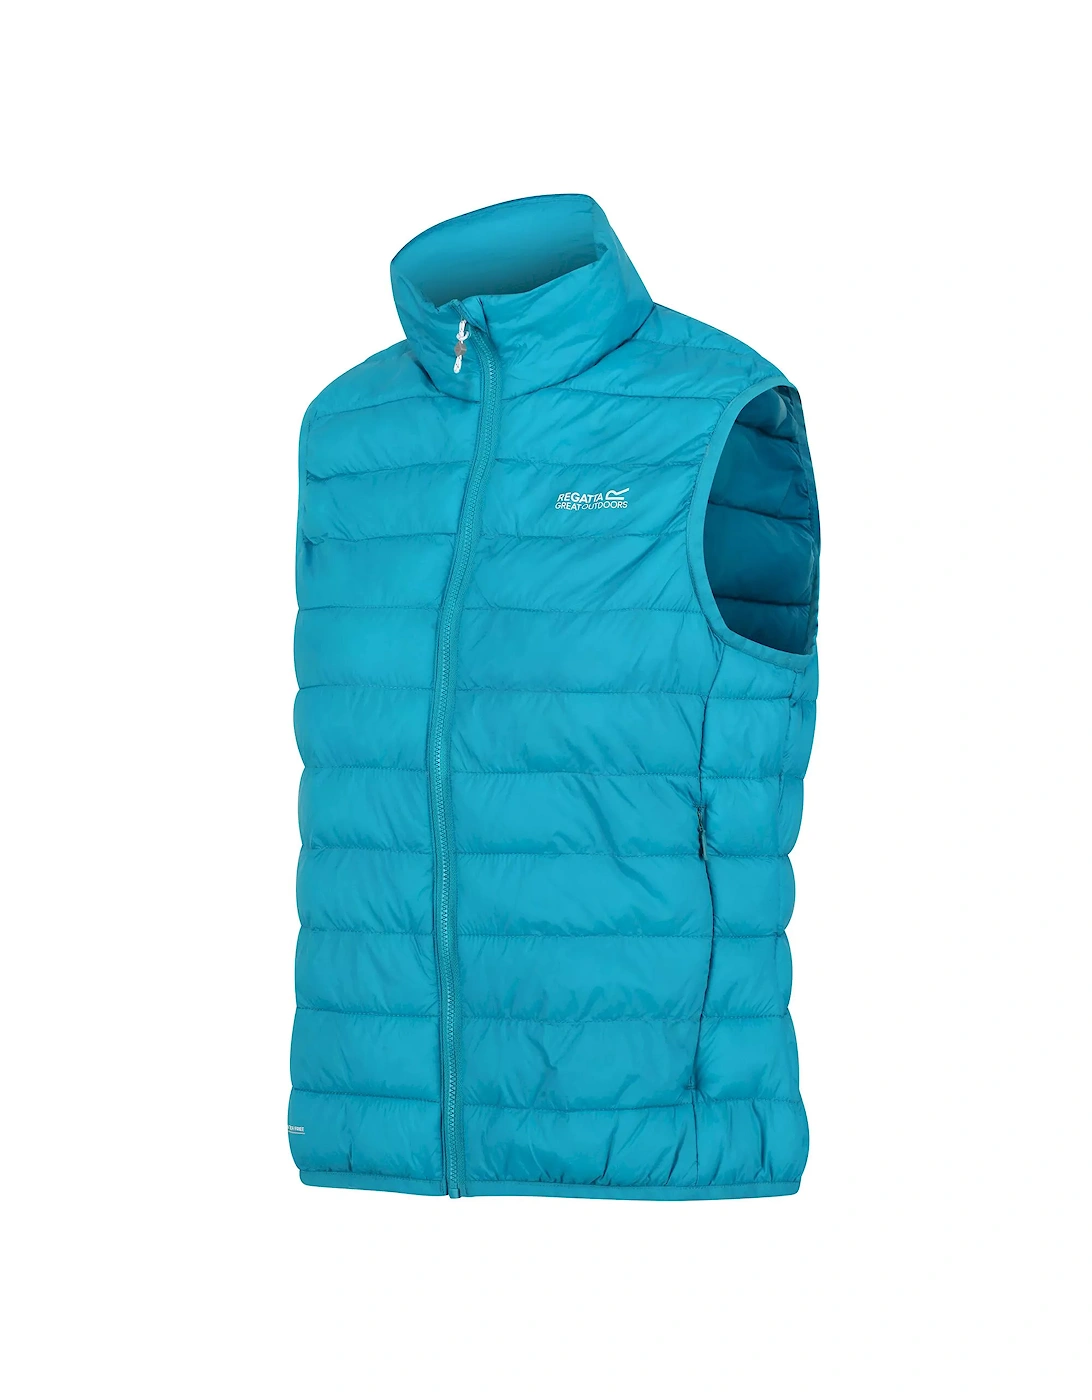 Womens/Ladies Hillpack Insulated Body Warmer